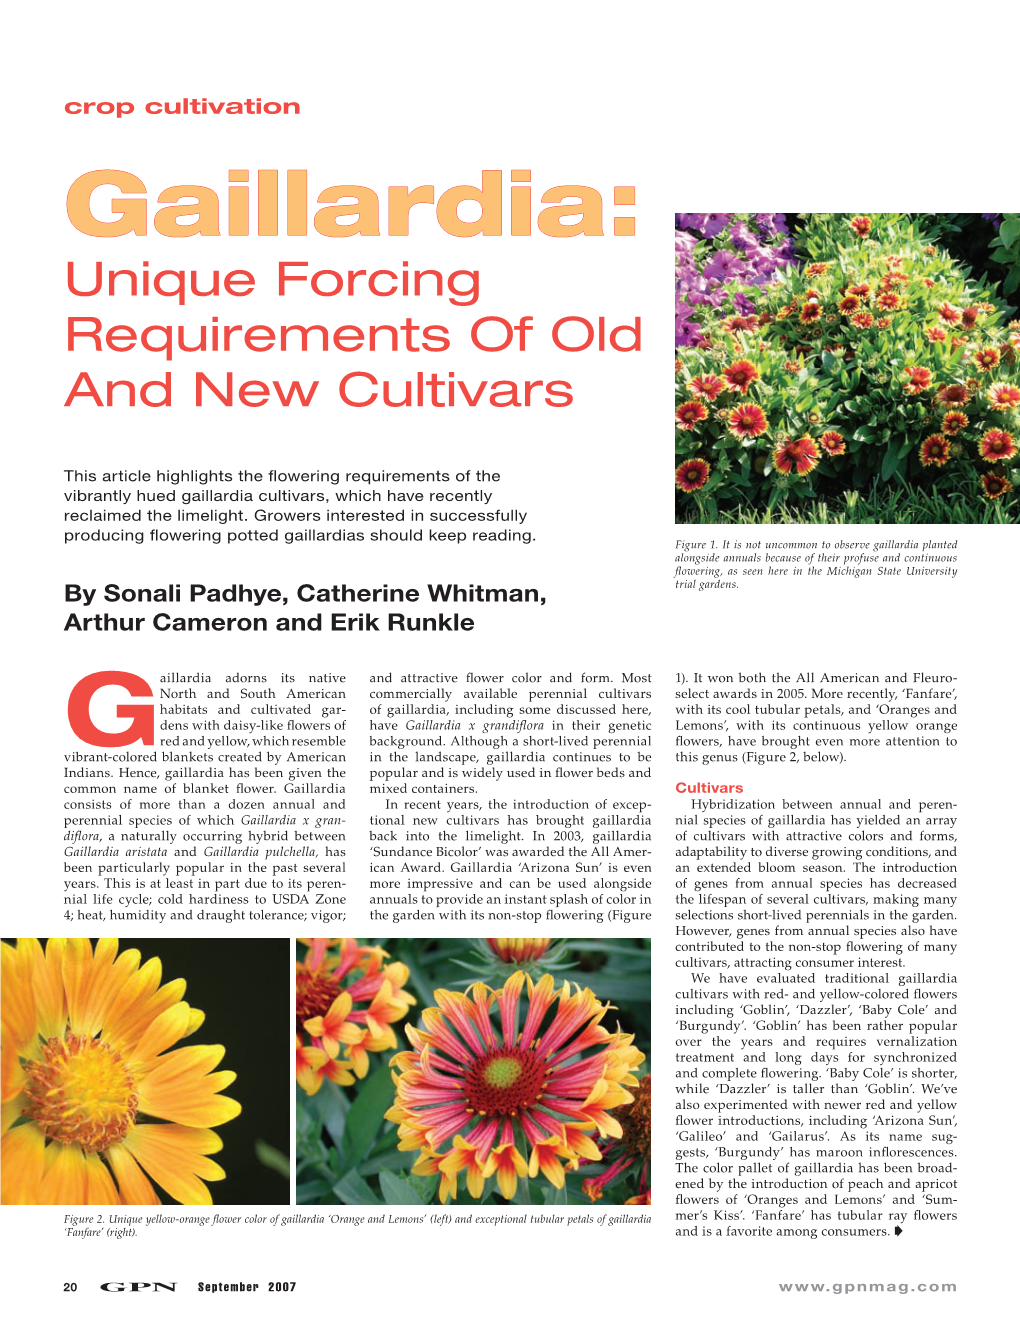 Crop Cultivation Ggaillardia:Aillardia: Unique Forcing Requirements of Old and New Cultivars